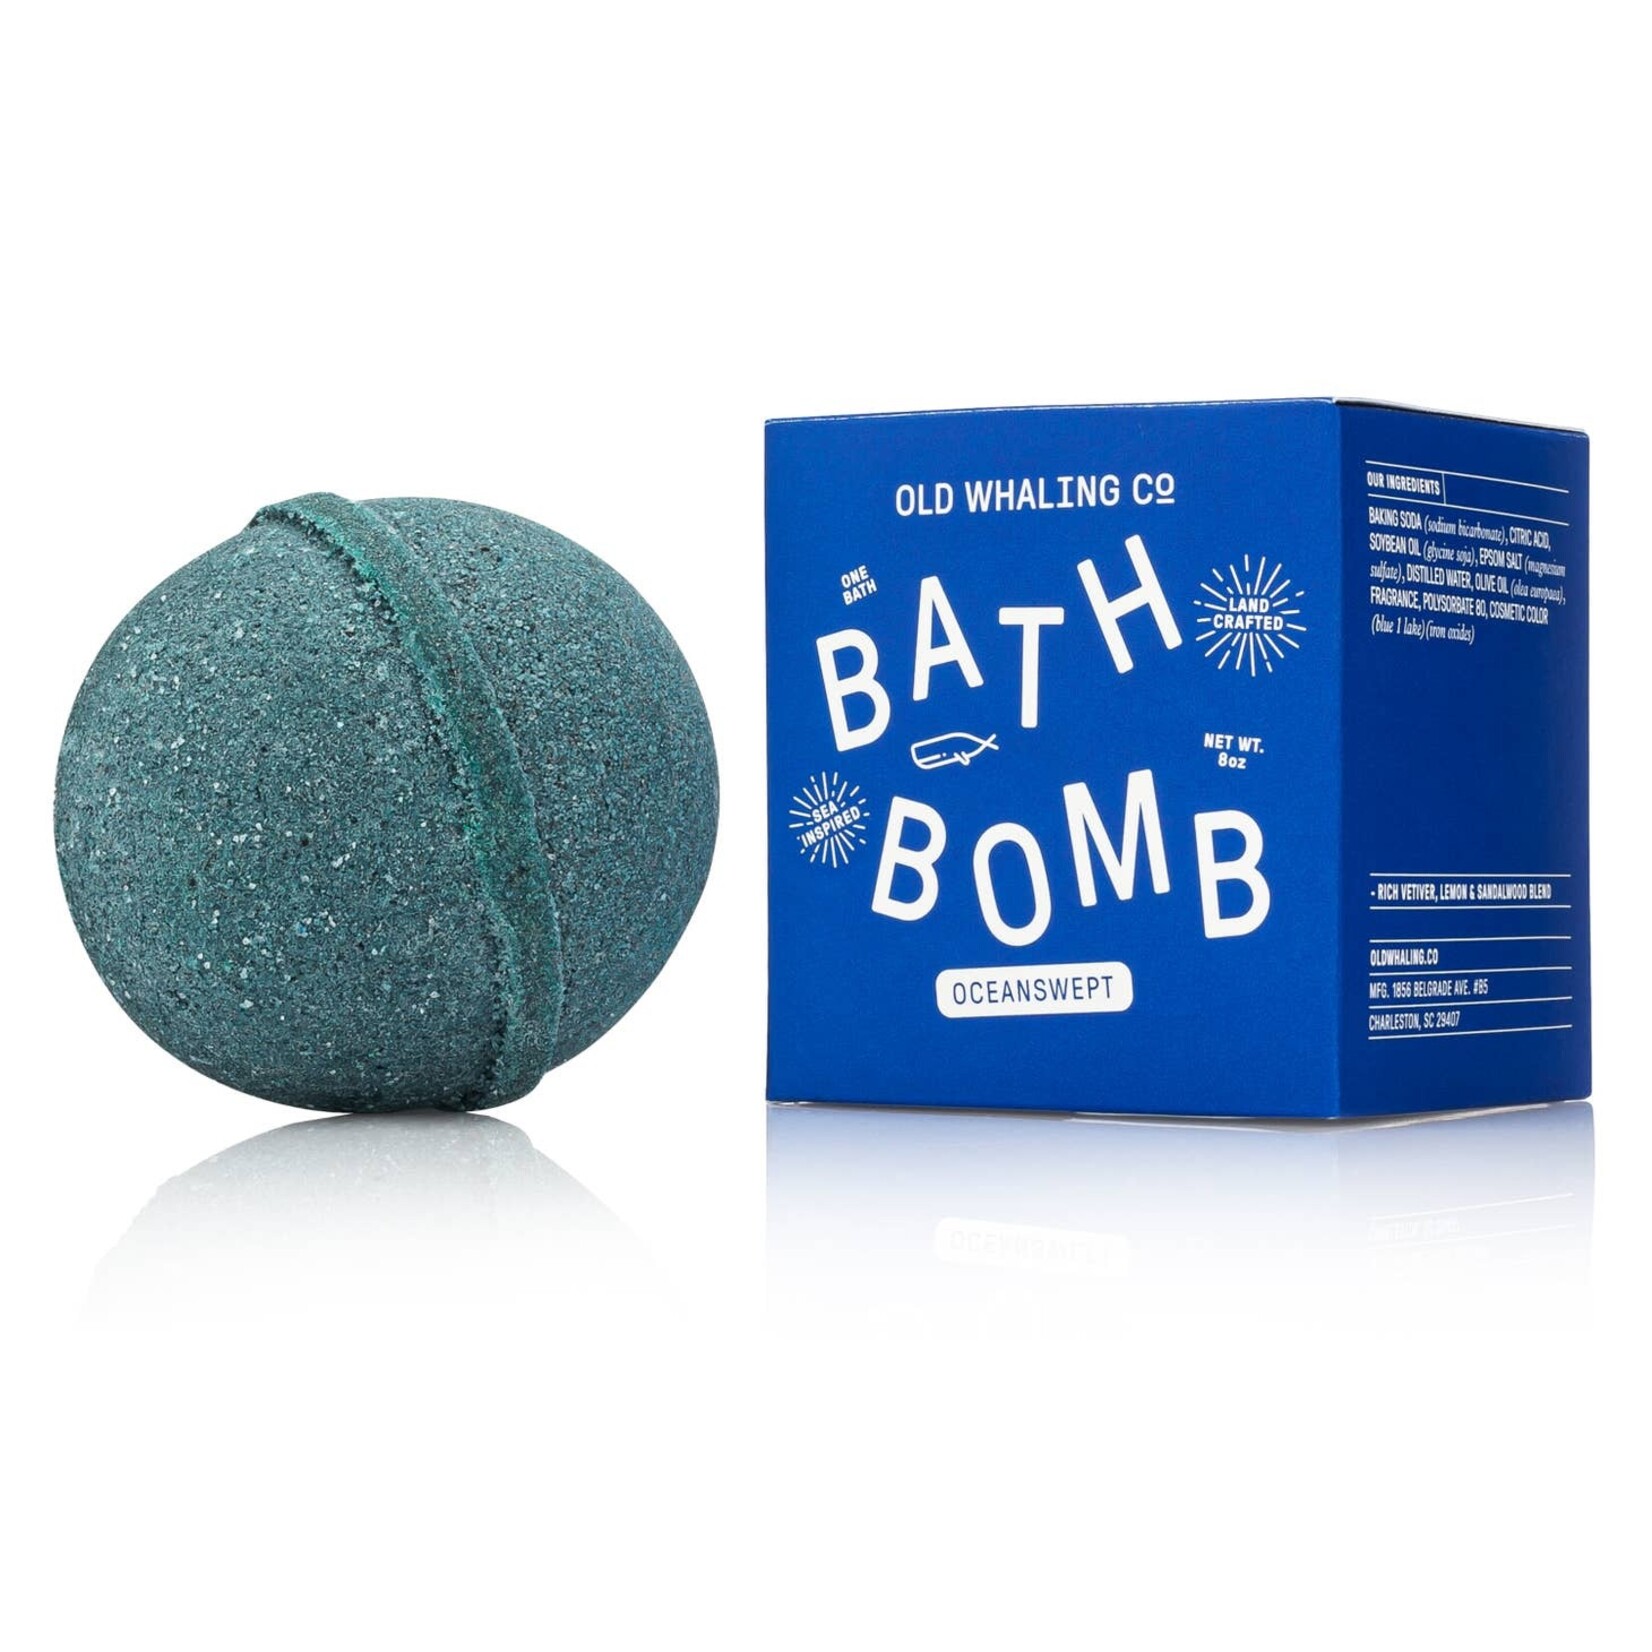 Old Whaling Company Oceanswept Bath Bomb